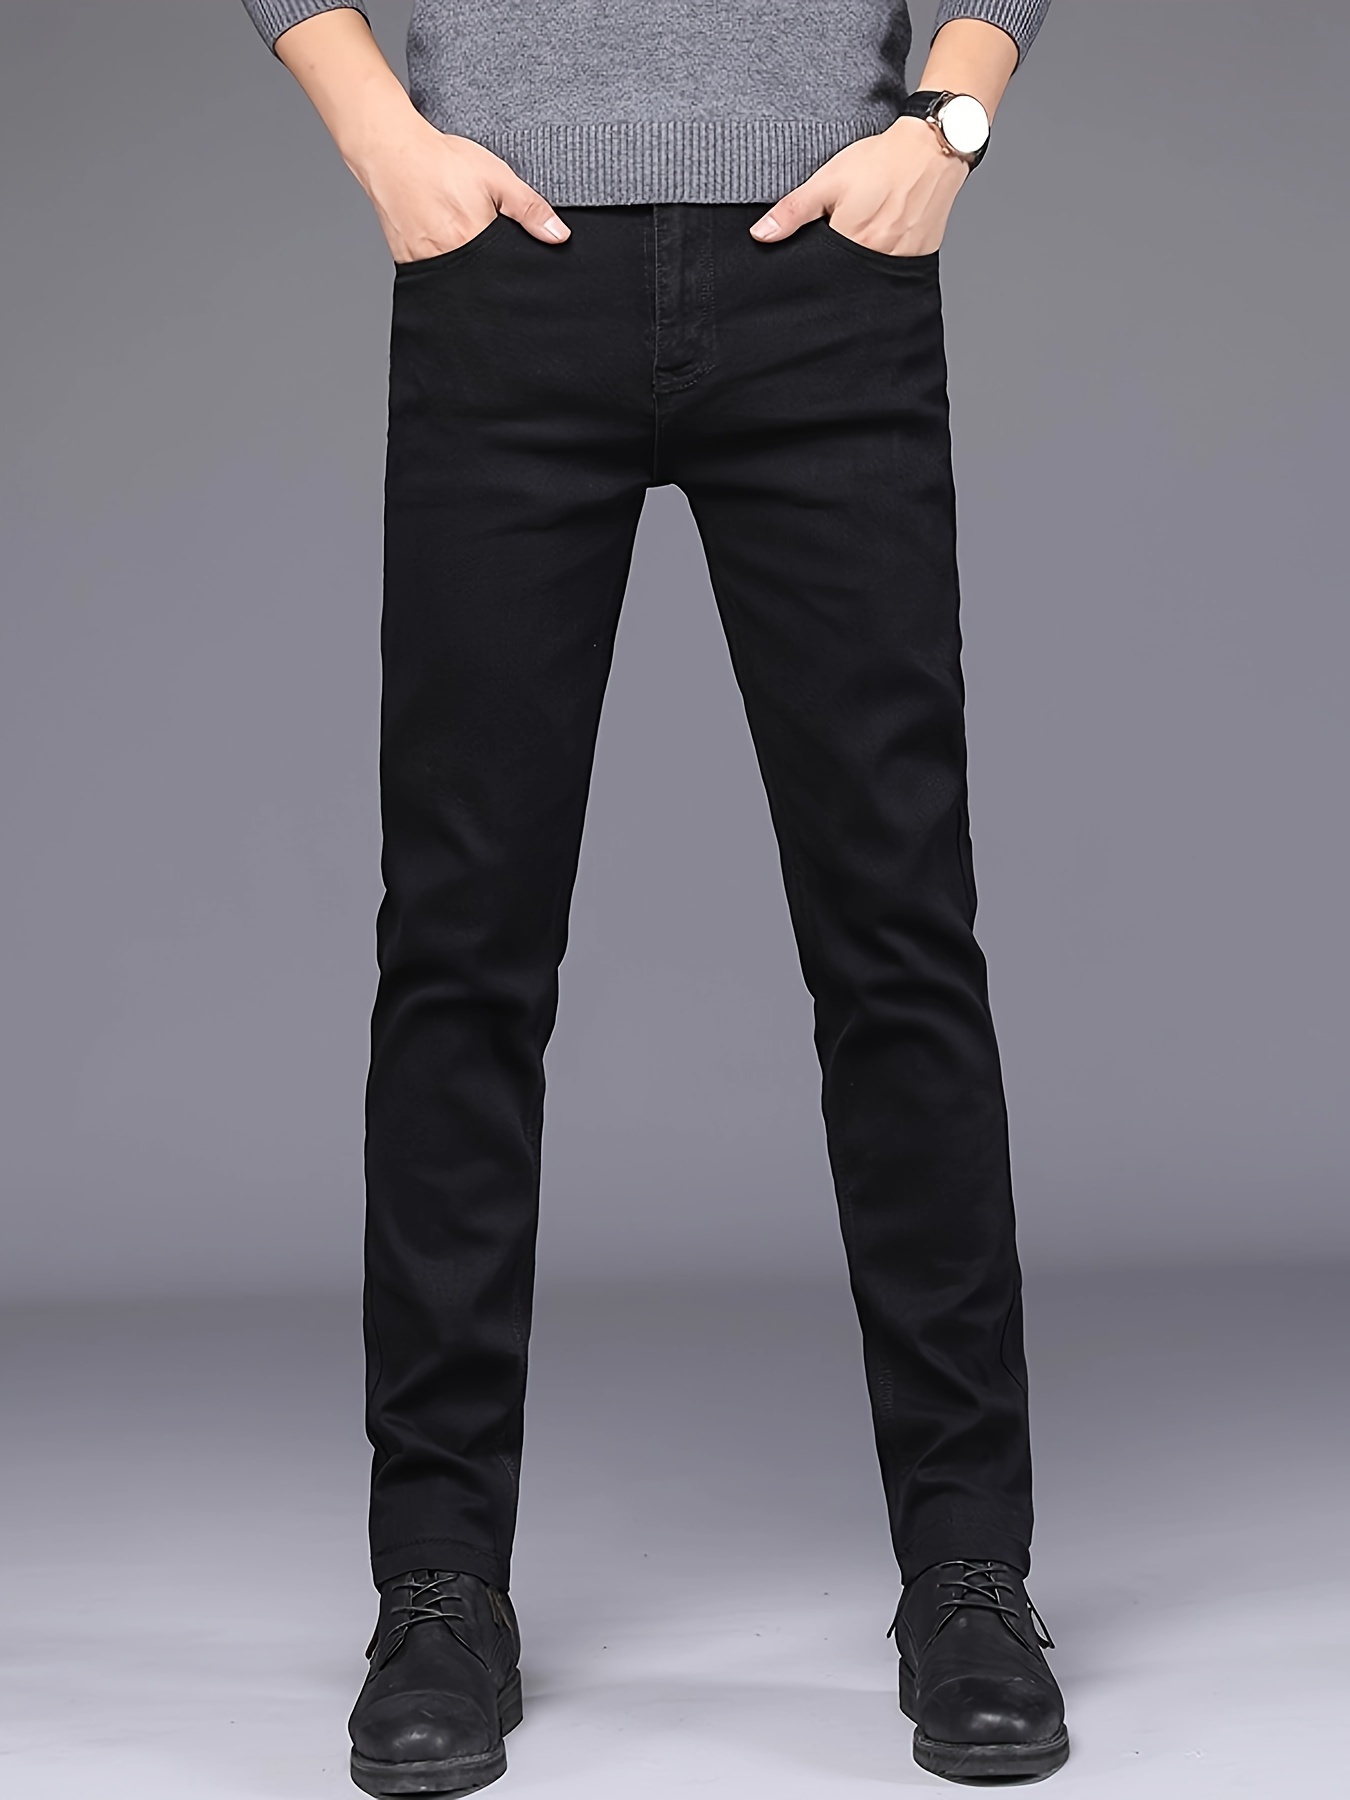 Men's Casual Semi-formal Jeans, Chic Classic Design Stretch Denim Pants For  Business Leisure Activities